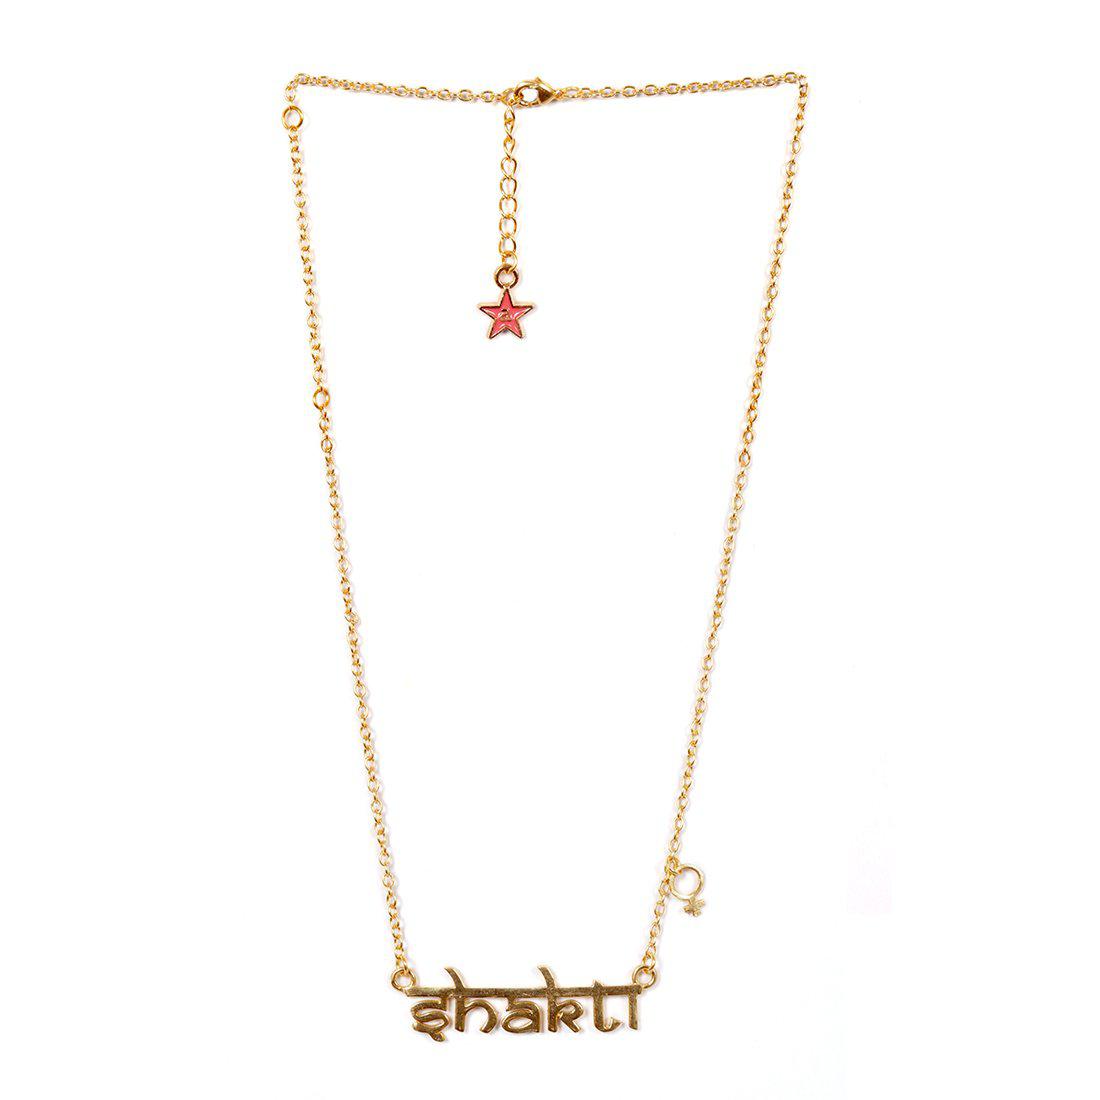 SHAKTI CHAIN NECKLACE WITH GIRL CHARM